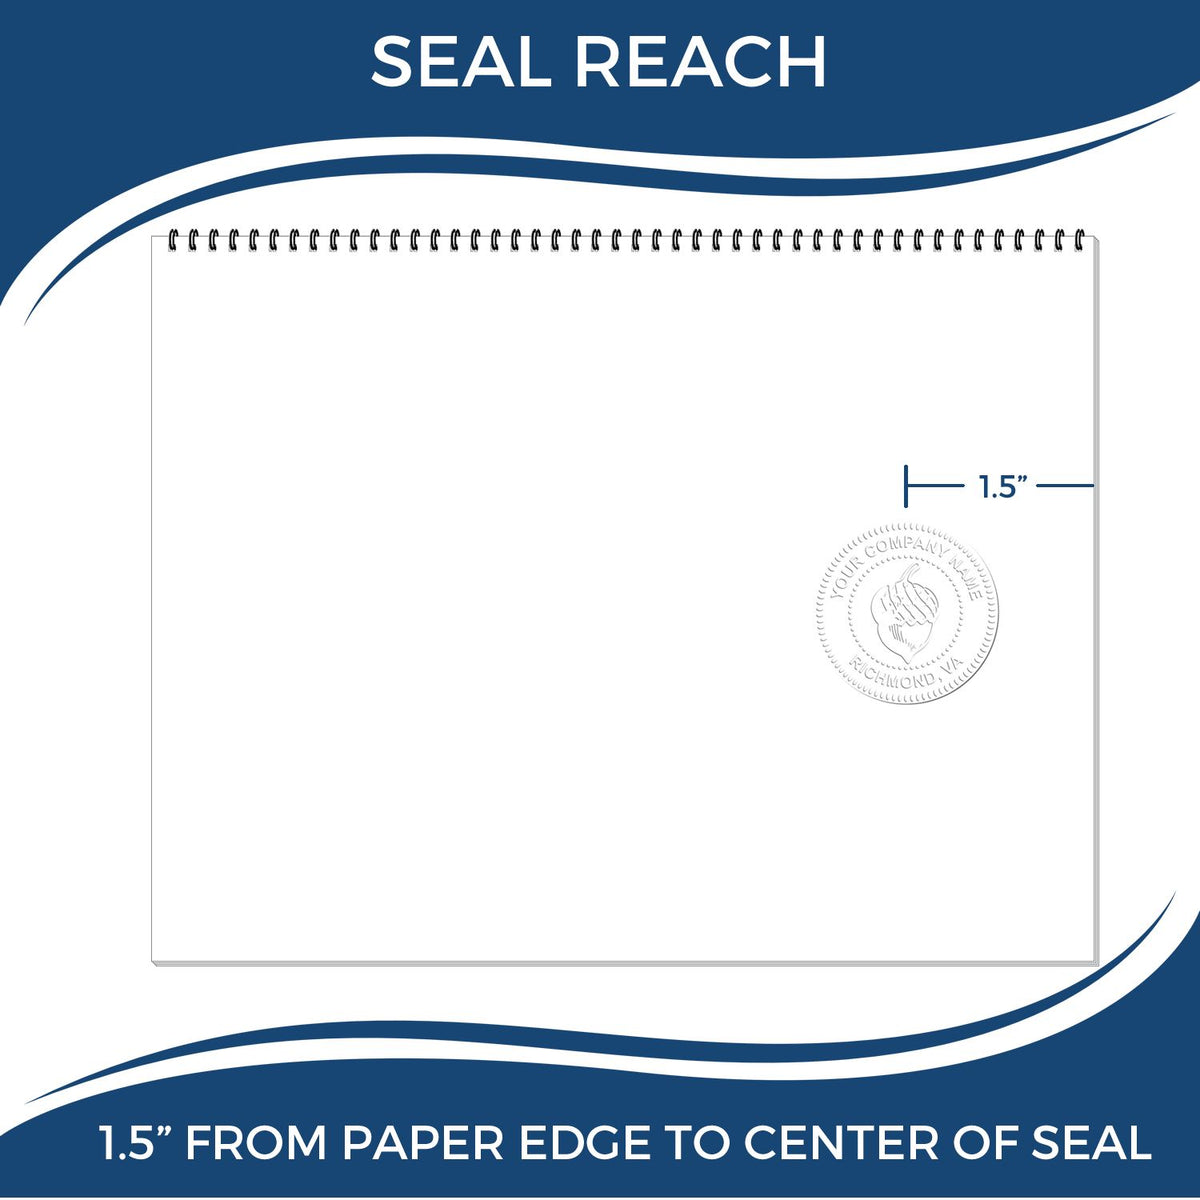 An infographic showing the seal reach which is represented by a ruler and a miniature seal image of the State of Missouri Soft Land Surveyor Embossing Seal